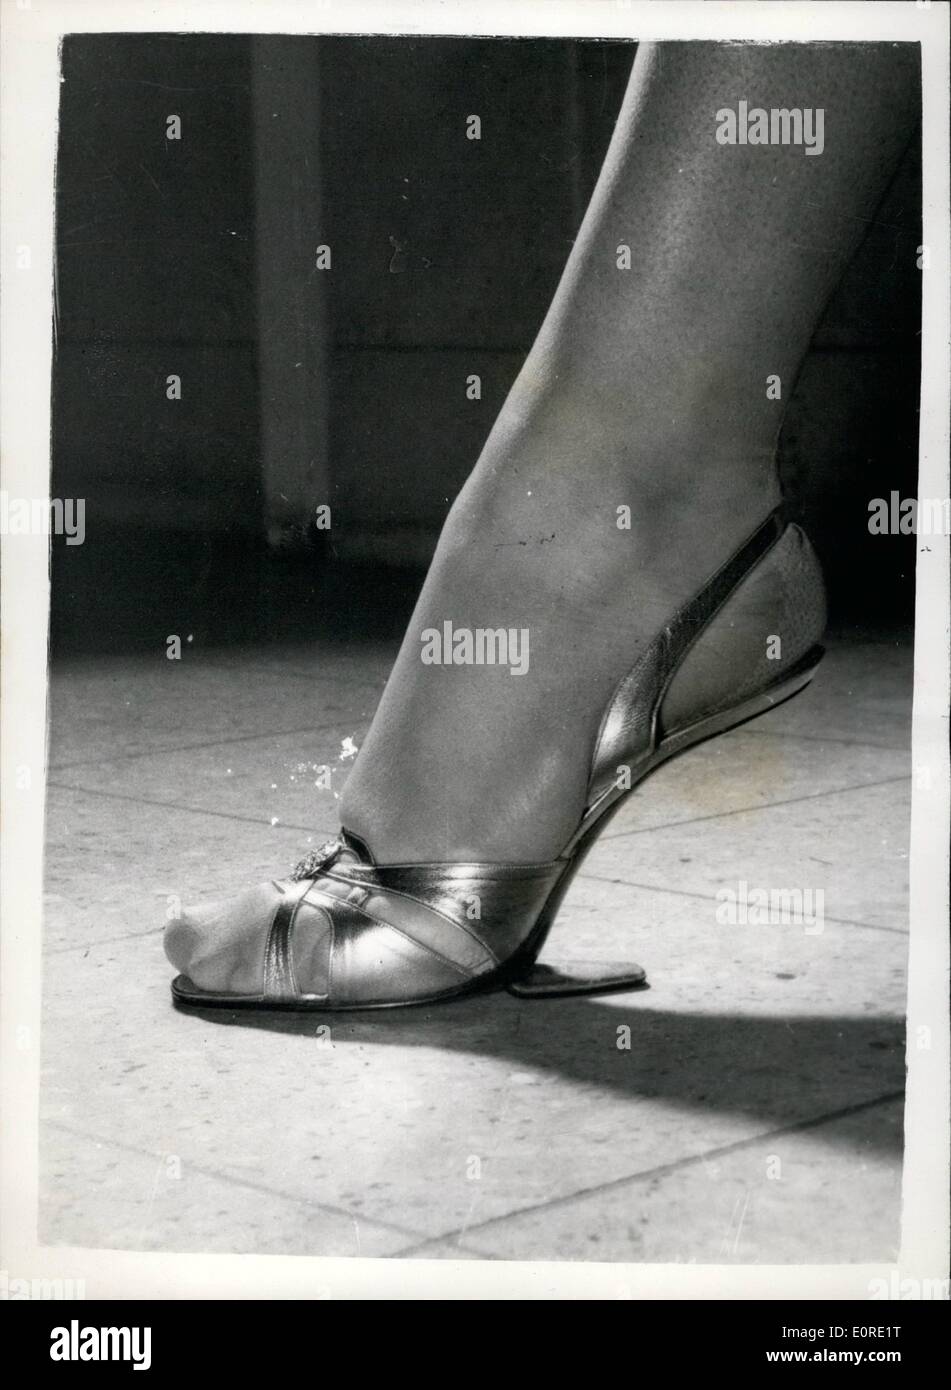 Feb. 02, 1959 - HERE IS THE SHOW SHOW OF THE FUTURE - THE SHOE WITH NO HEELS Here is the shoe of the future for the female the shoe you'll never need to have hulled because there are no heels. If you're worried about walking in court shoes without heels, then don't be, because they are held up by a strong metal support (which also gives balance to the shoe) that juts out from the sole to the instep. These heelless court shoes were the sensation of the Italian fashion shows Stock Photo